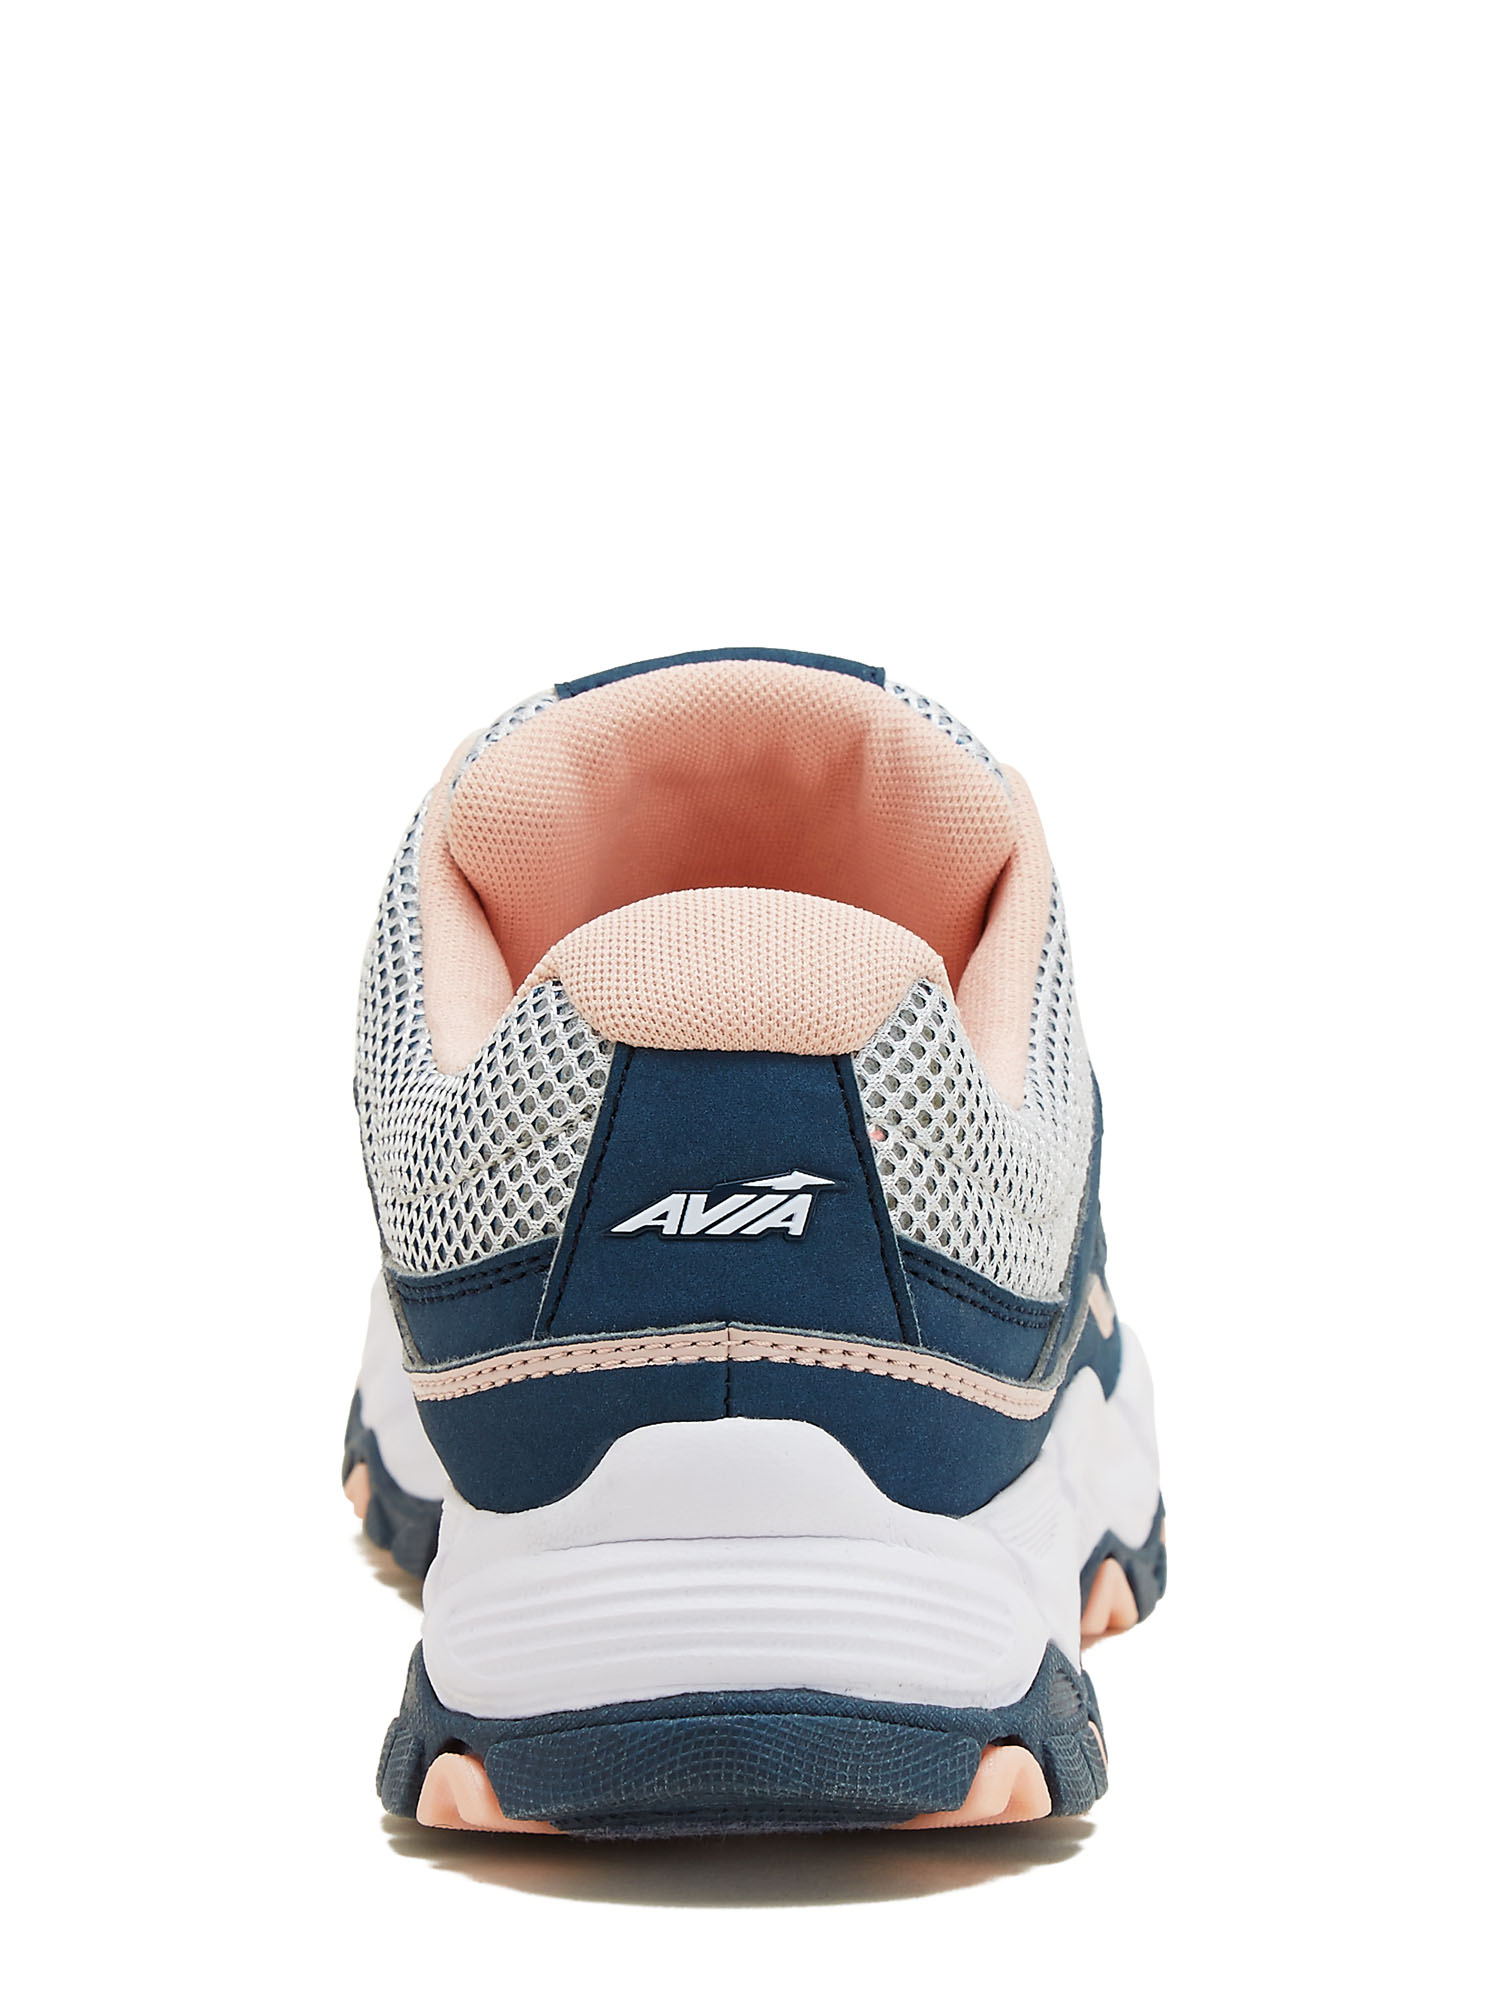 Avia Women's Elevate Athletic Sneakers, Wide Width Available - image 5 of 5